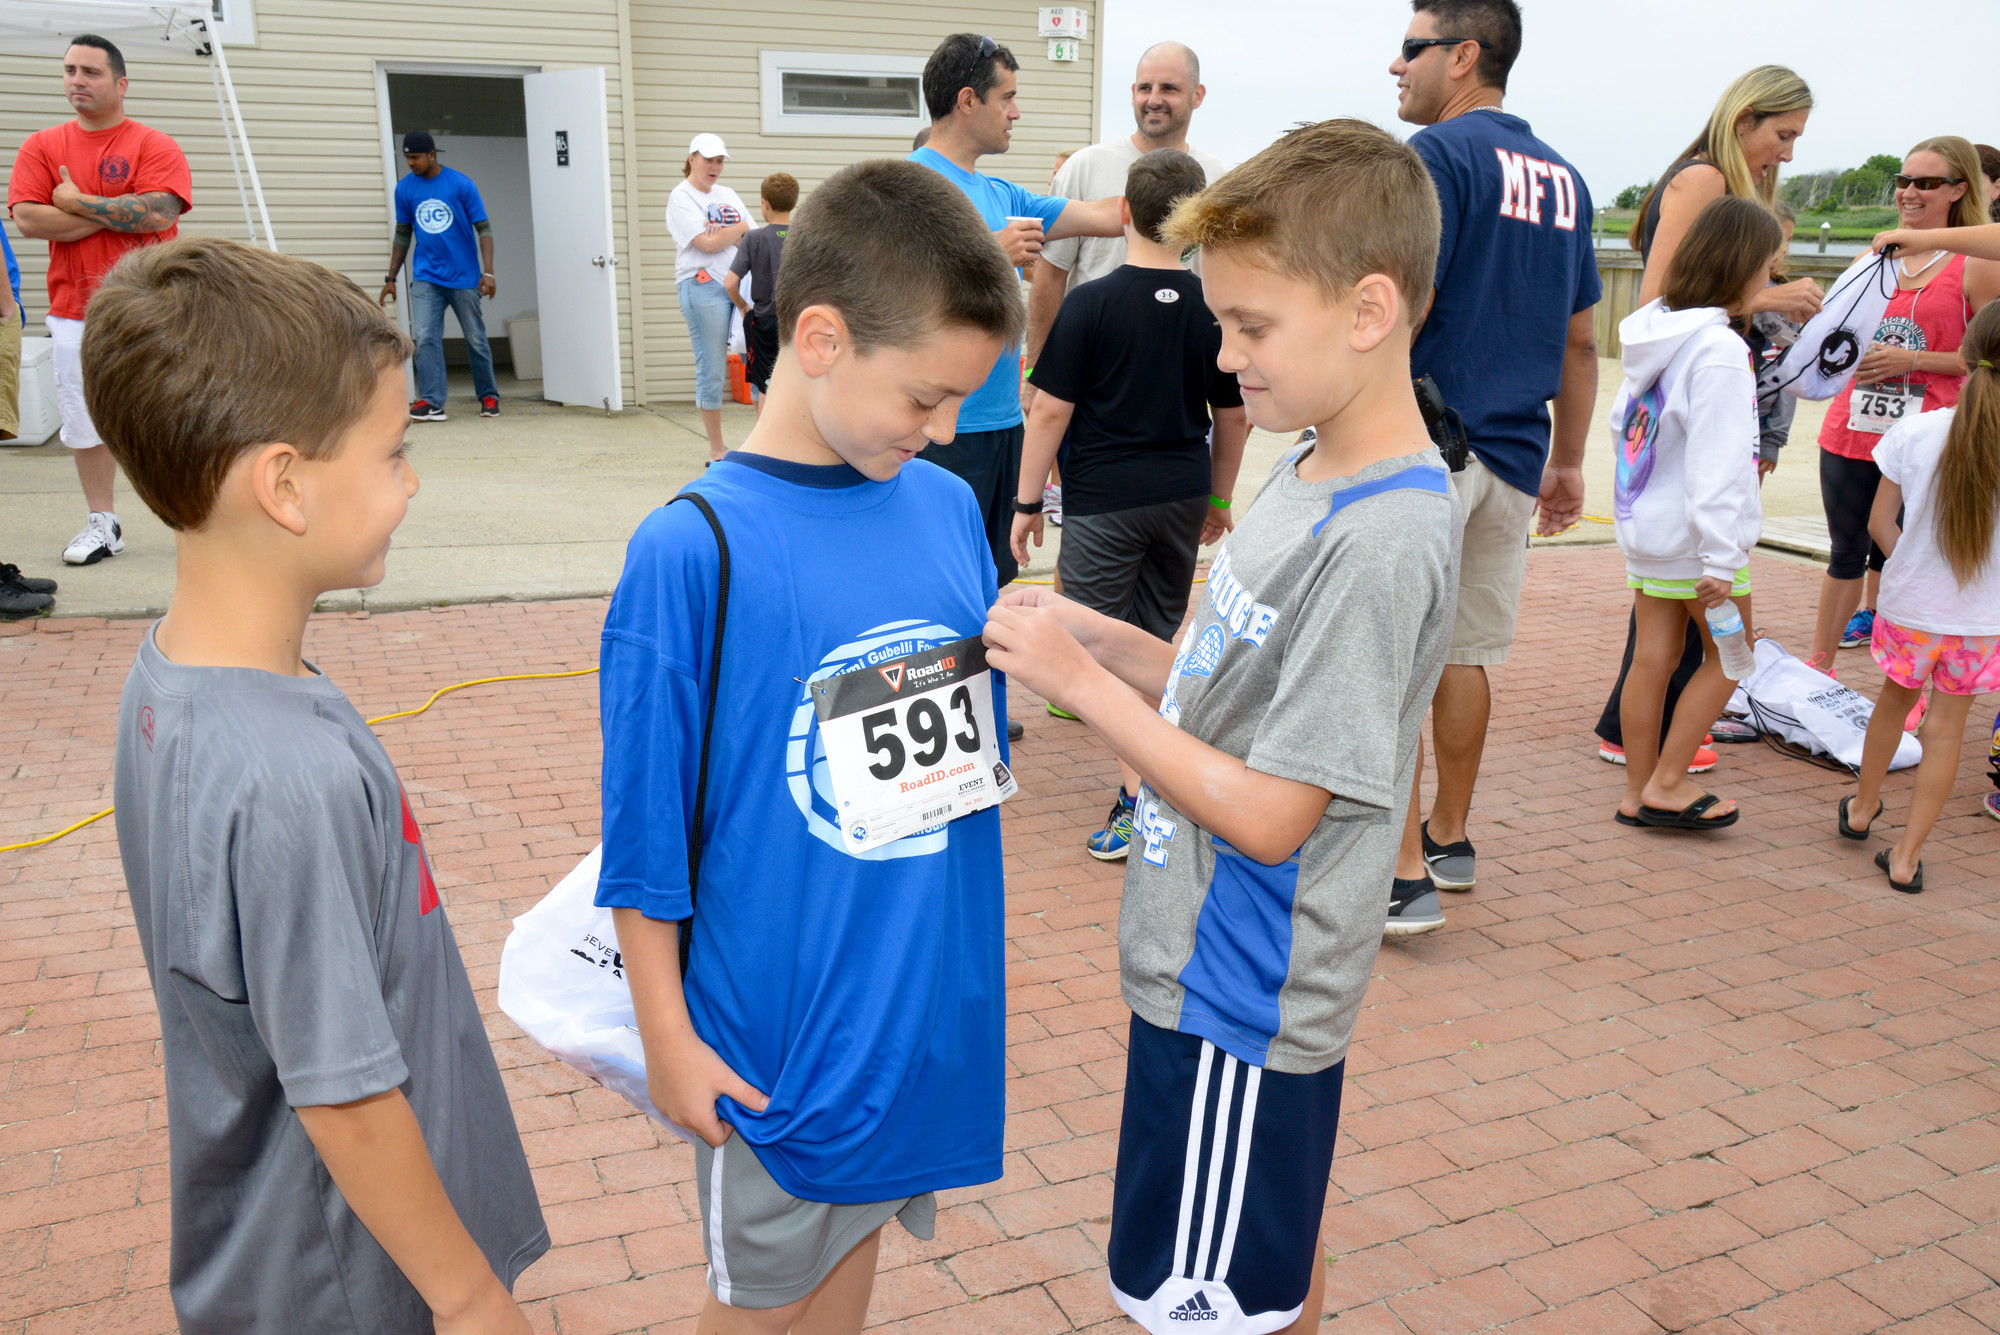 Getting a number pinned on, Christian Luca age, 7, Nicholas Colon, 8, Mario Hroncich, 9 at the Gubelli Race/Walk 2015.